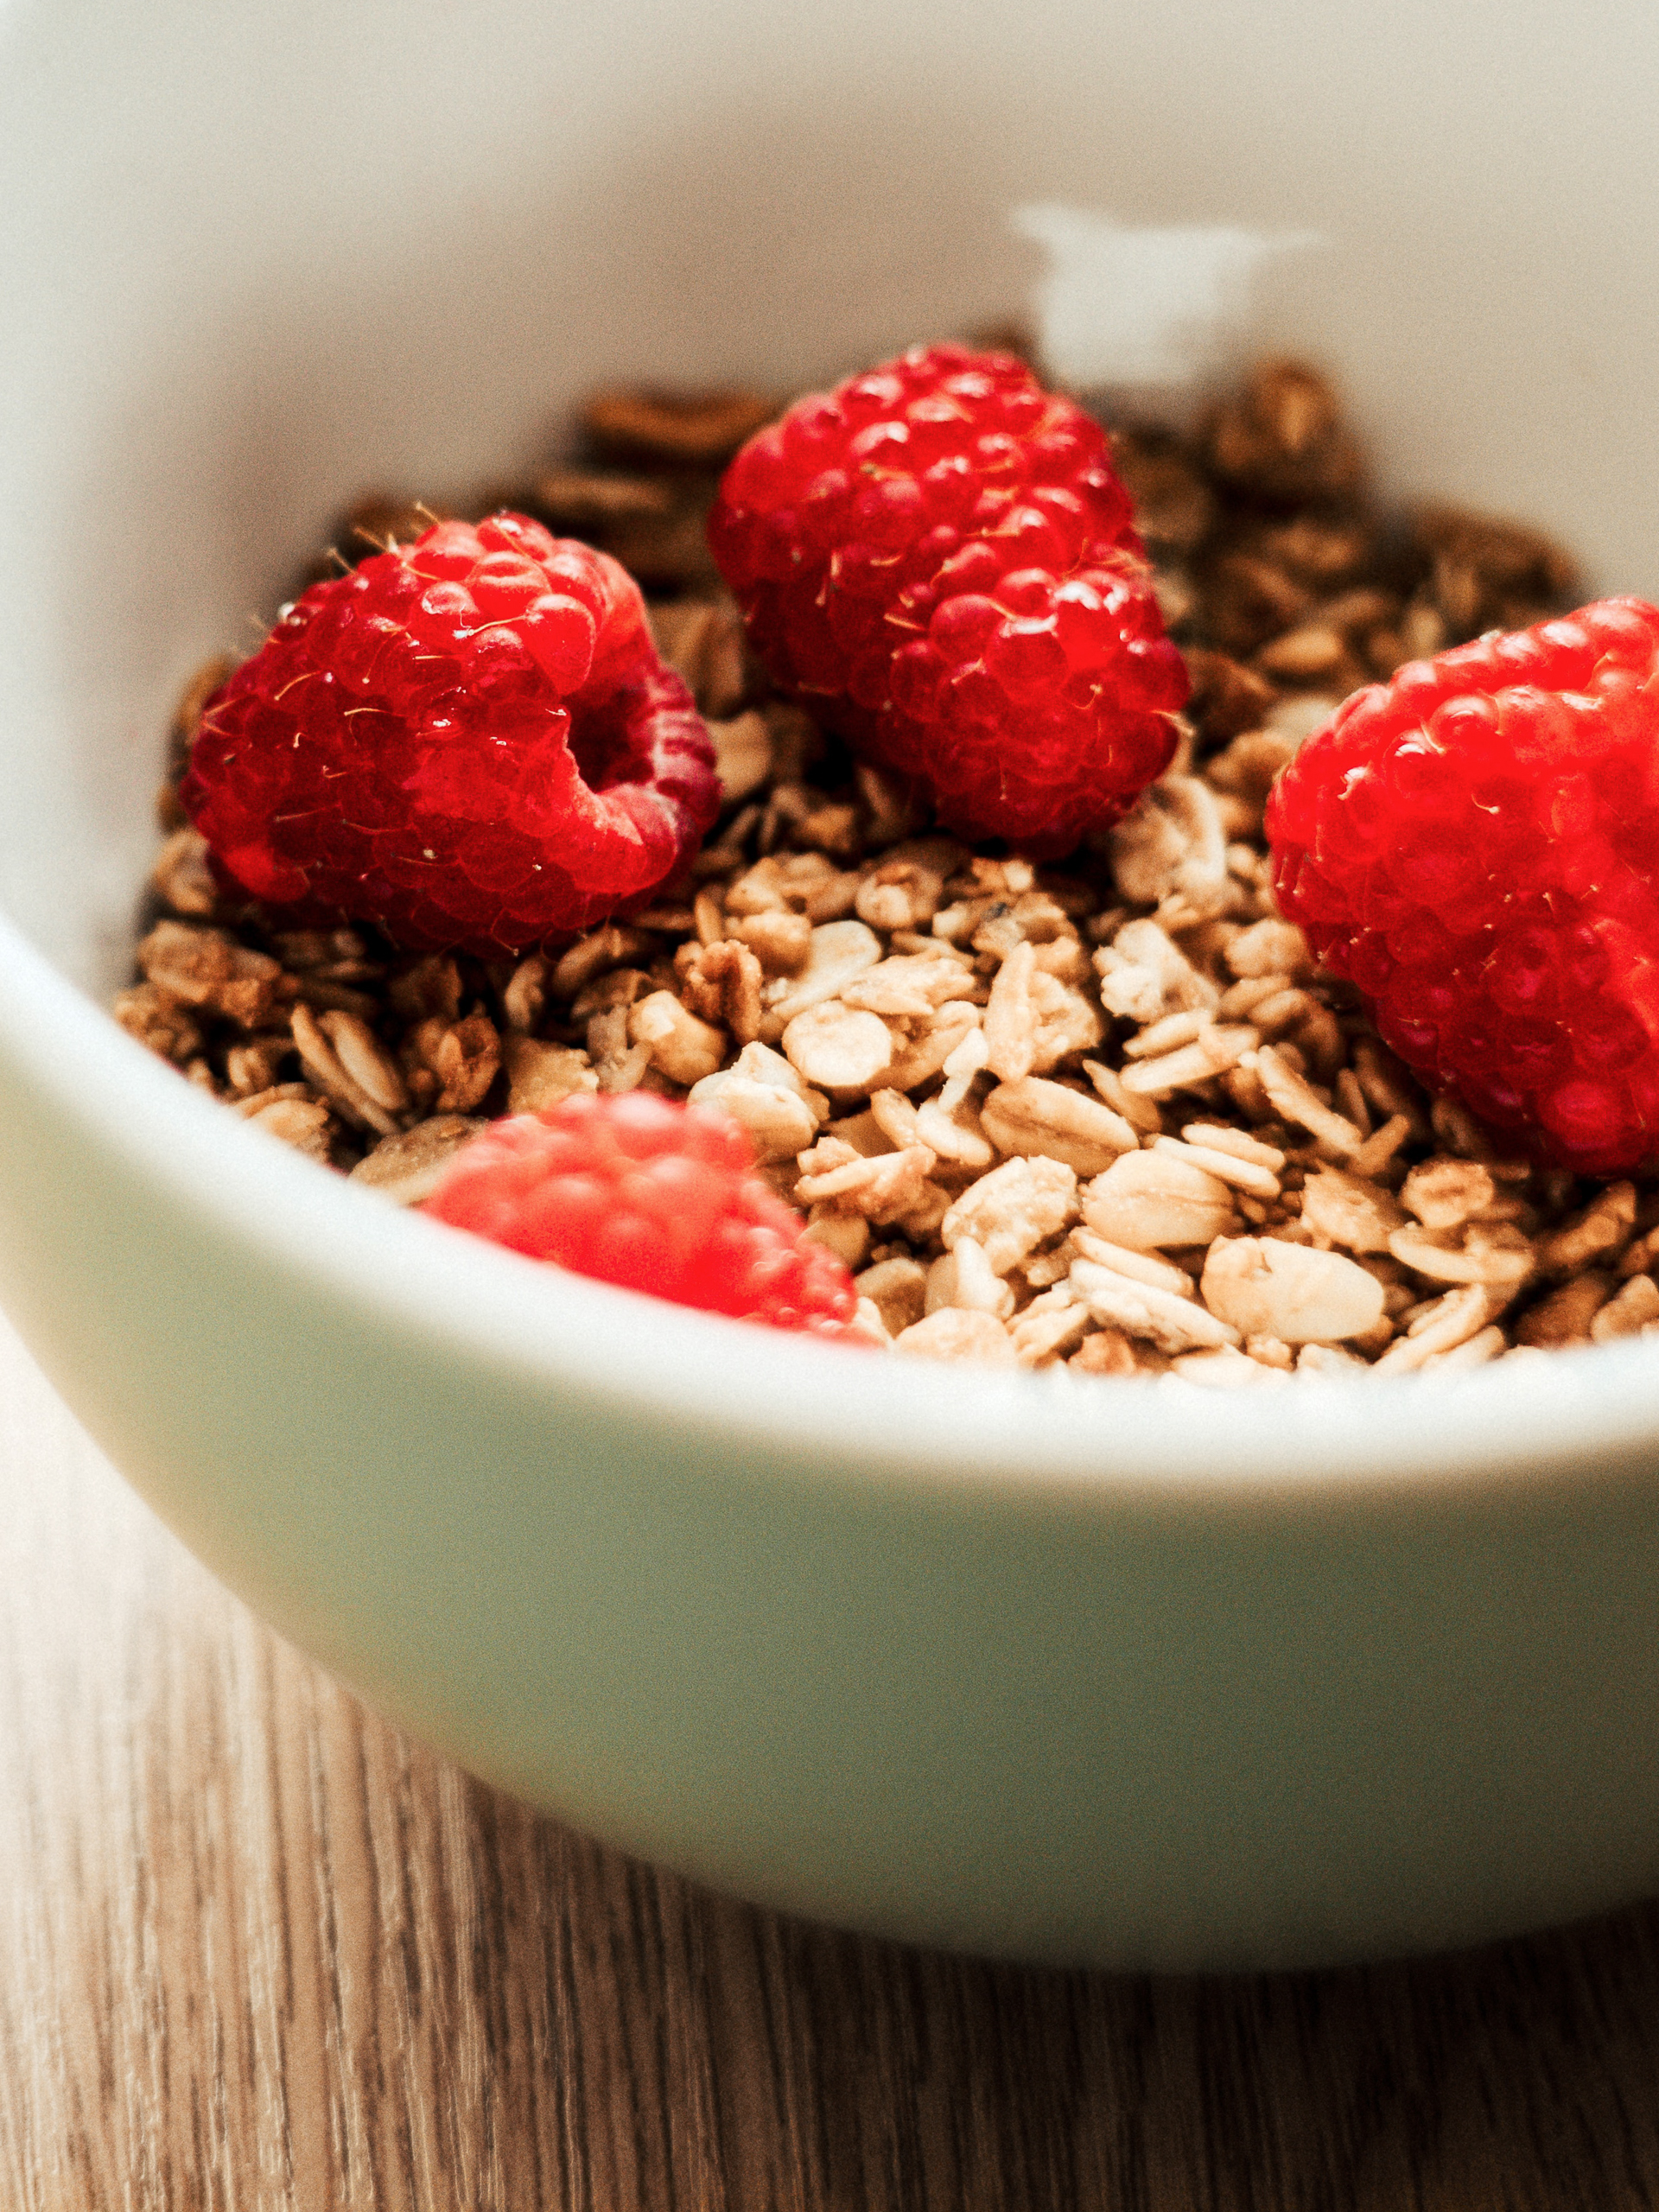 3 Reasons Why a High-Fibre Diet Fights Belly Fat